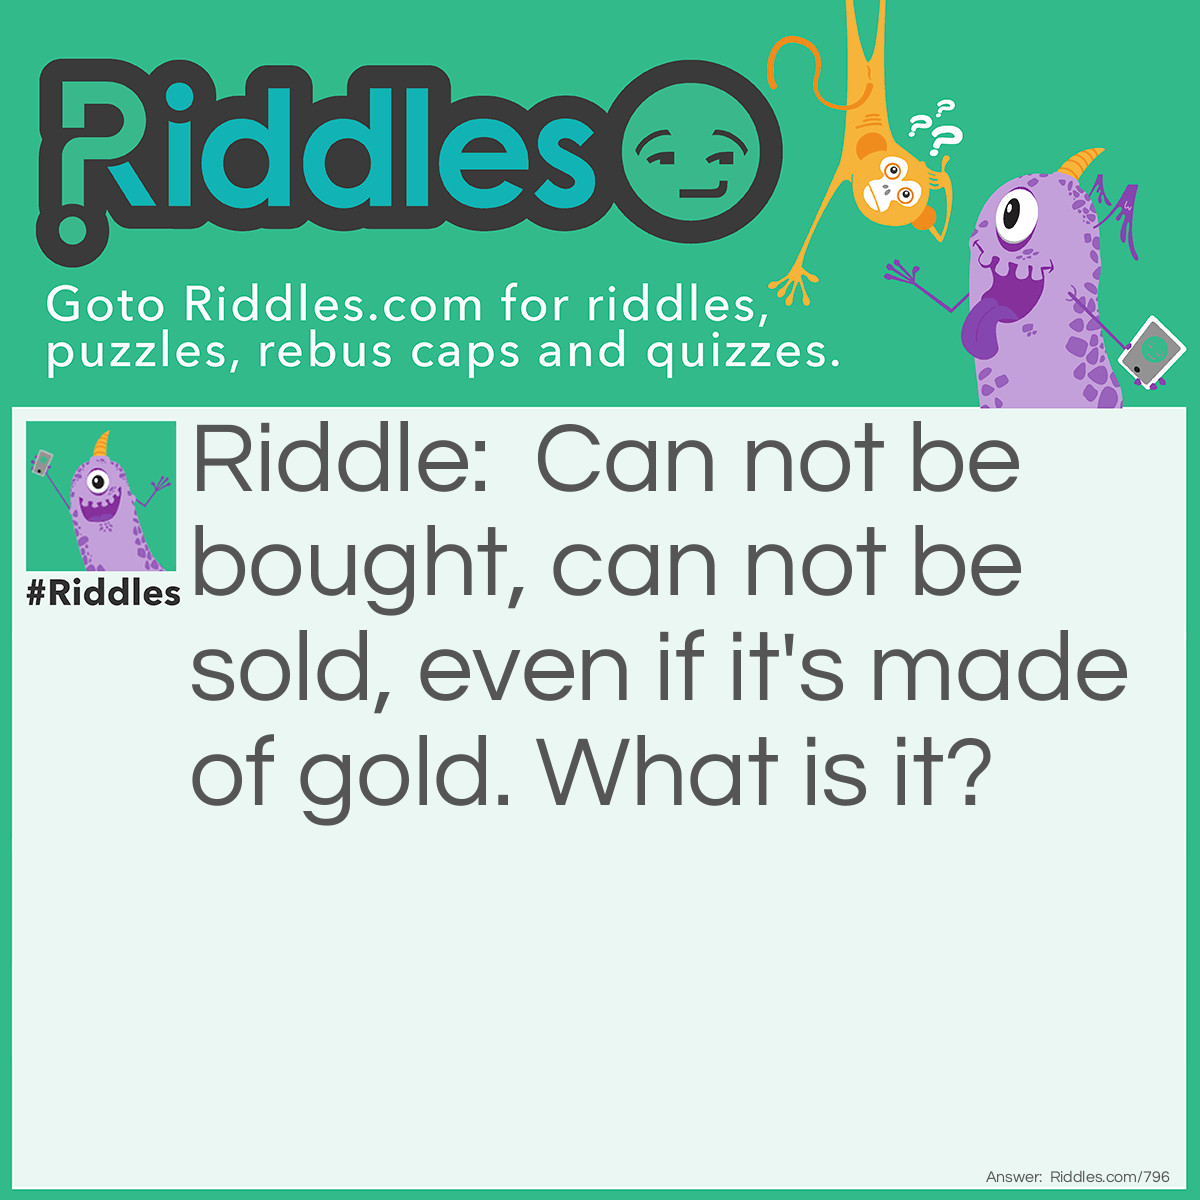 Riddle: Can not be bought, can not be sold, even if it's made of gold. What is it? Answer: It is a heart.